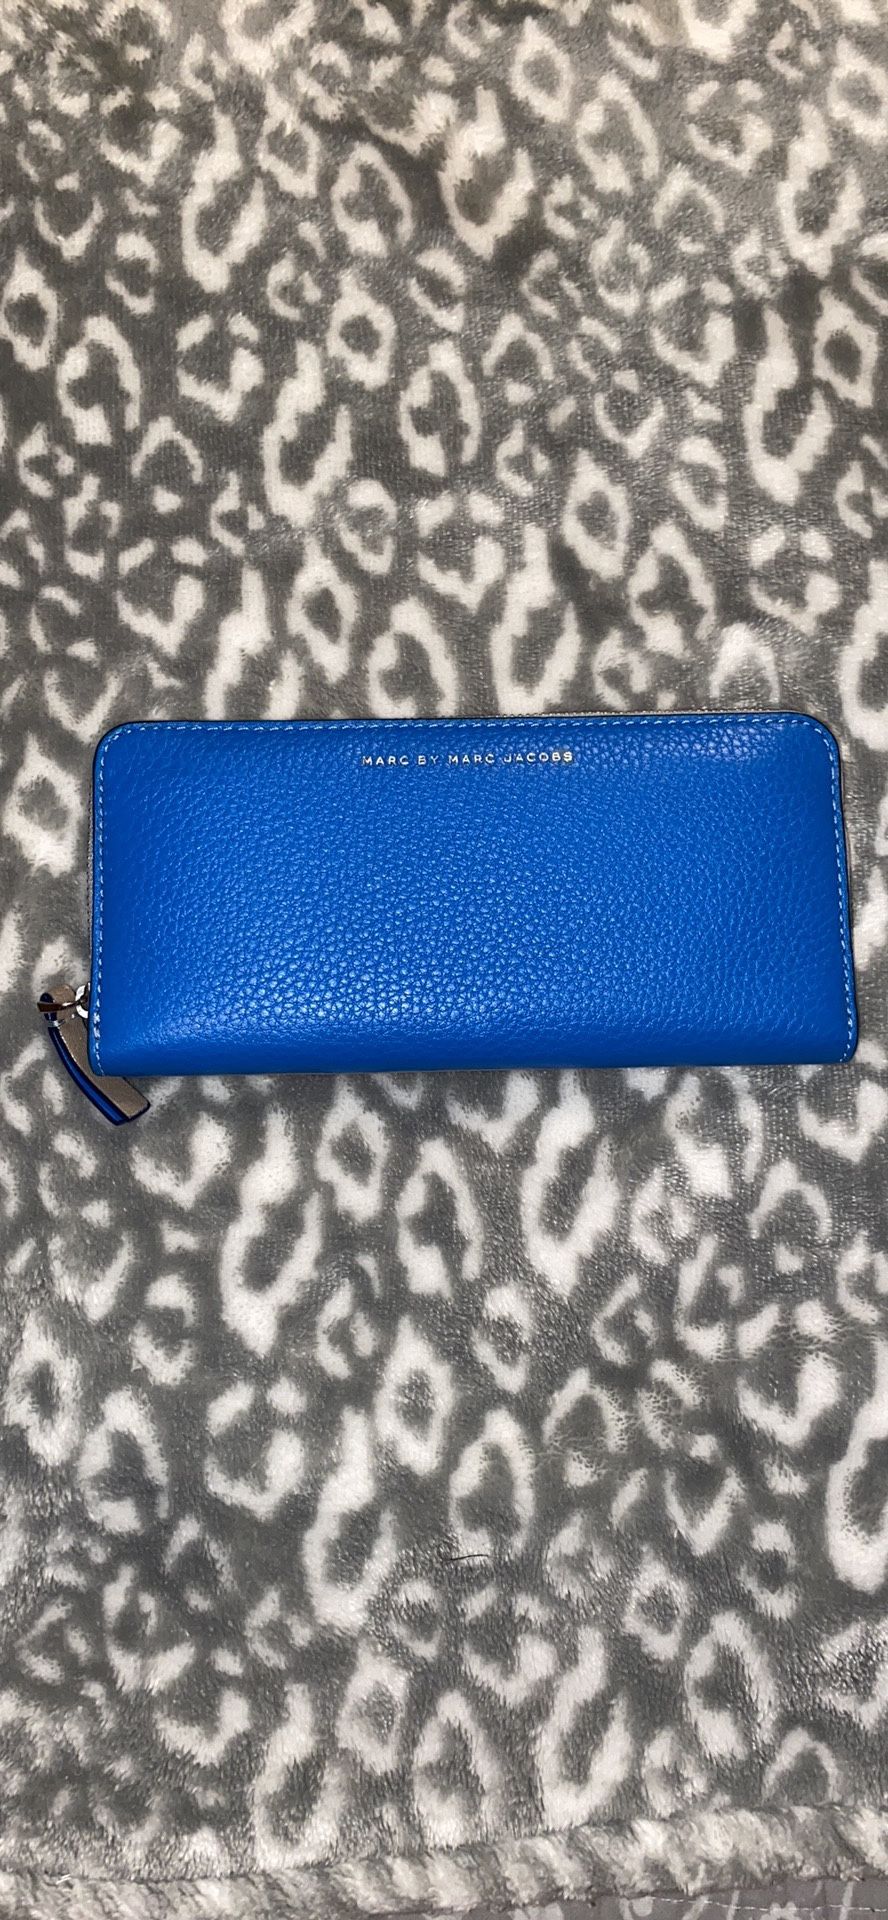 Authentic Marc By Marc Jacobs Wallet!